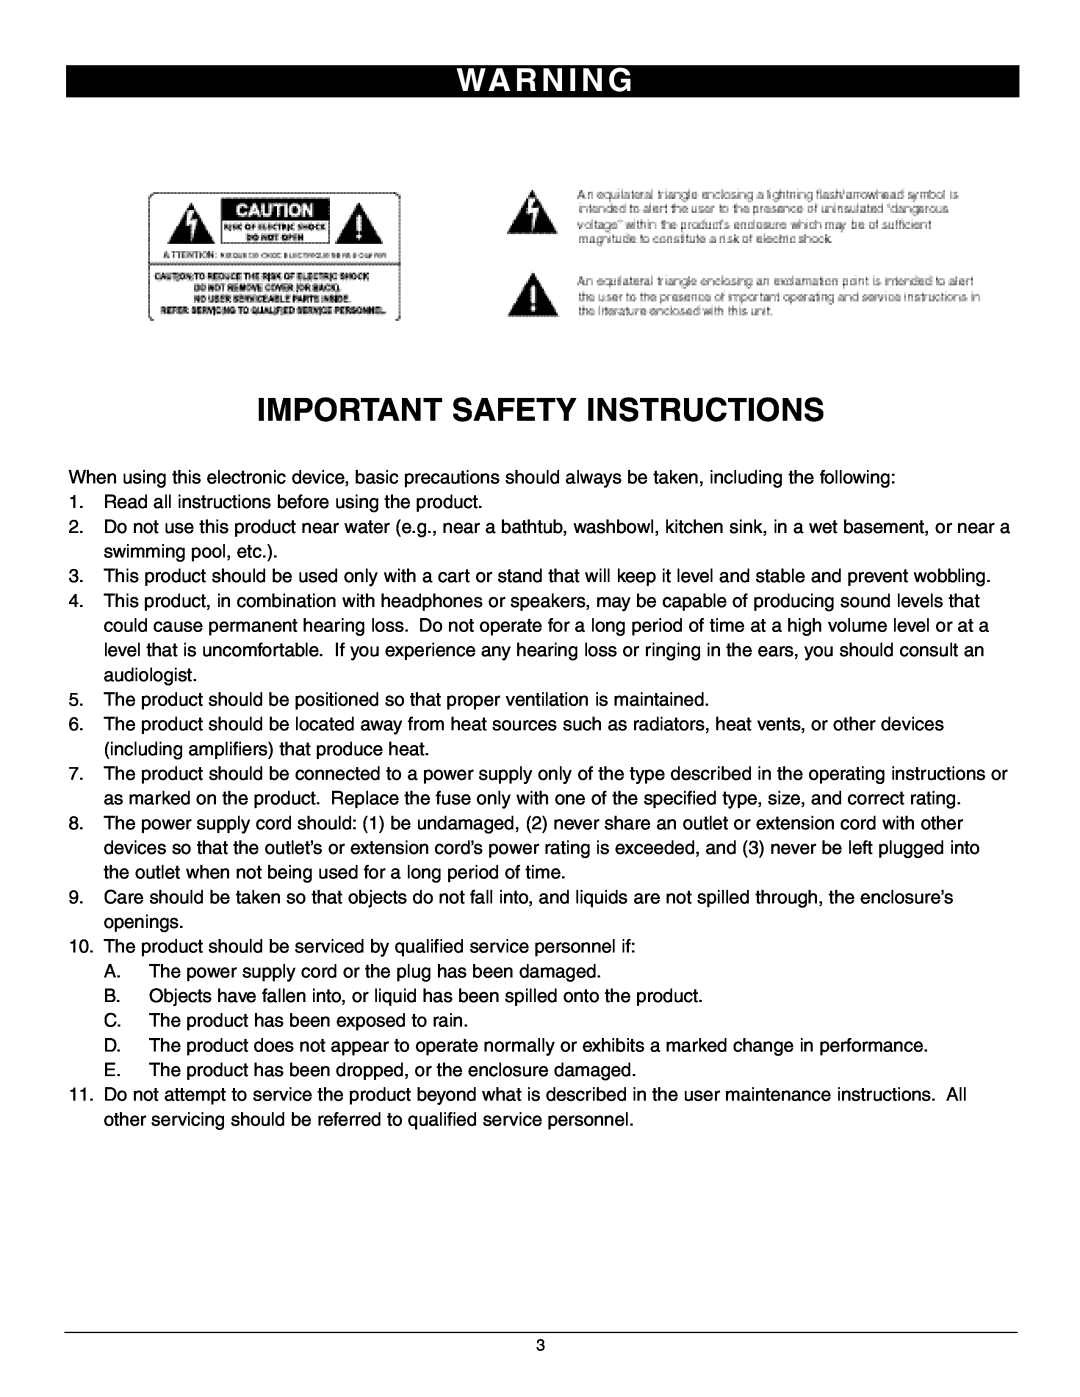 Nady Systems PPA-300 owner manual Wa R N I N G, Important Safety Instructions 